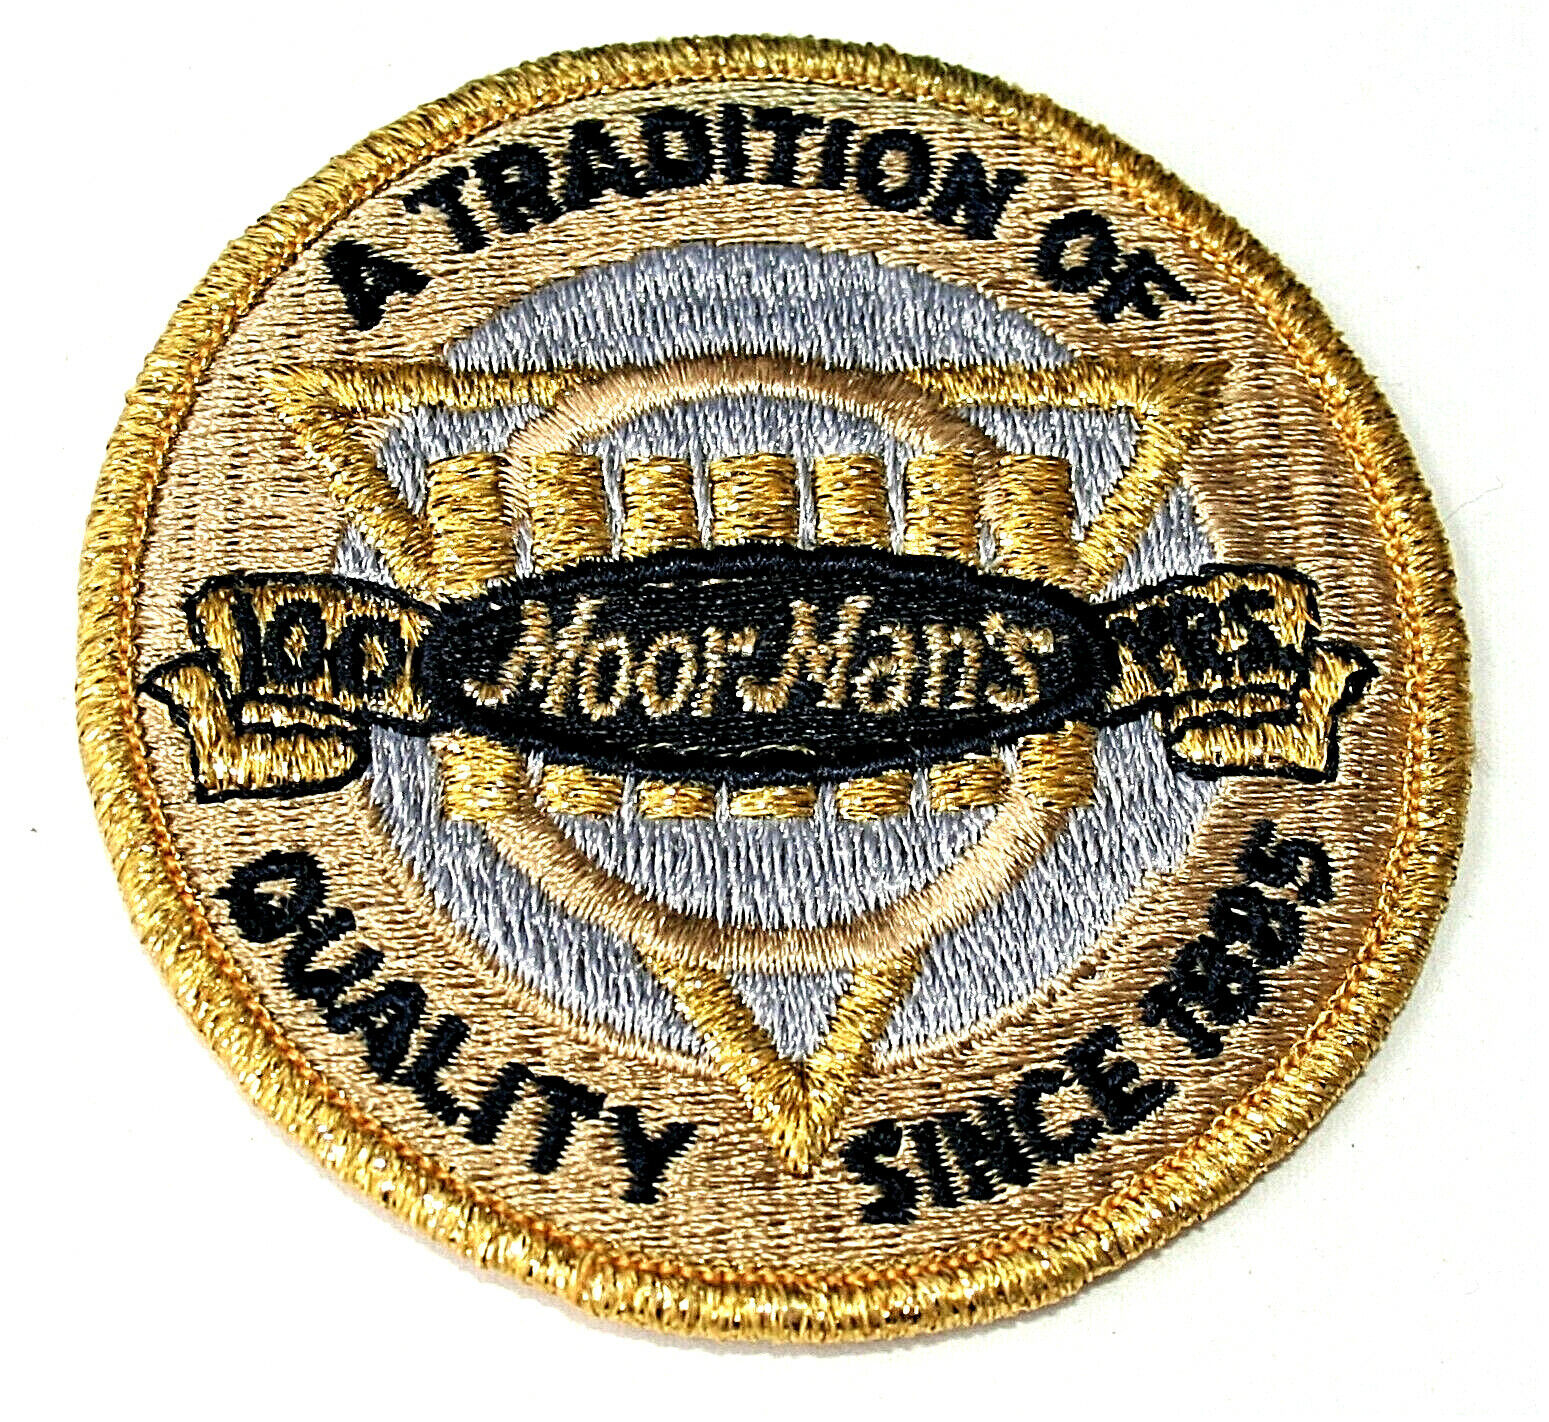 VTG MoorMan\'s 100 Years Animal Food Feeds 1970s Cloth Patch New NOS 1985